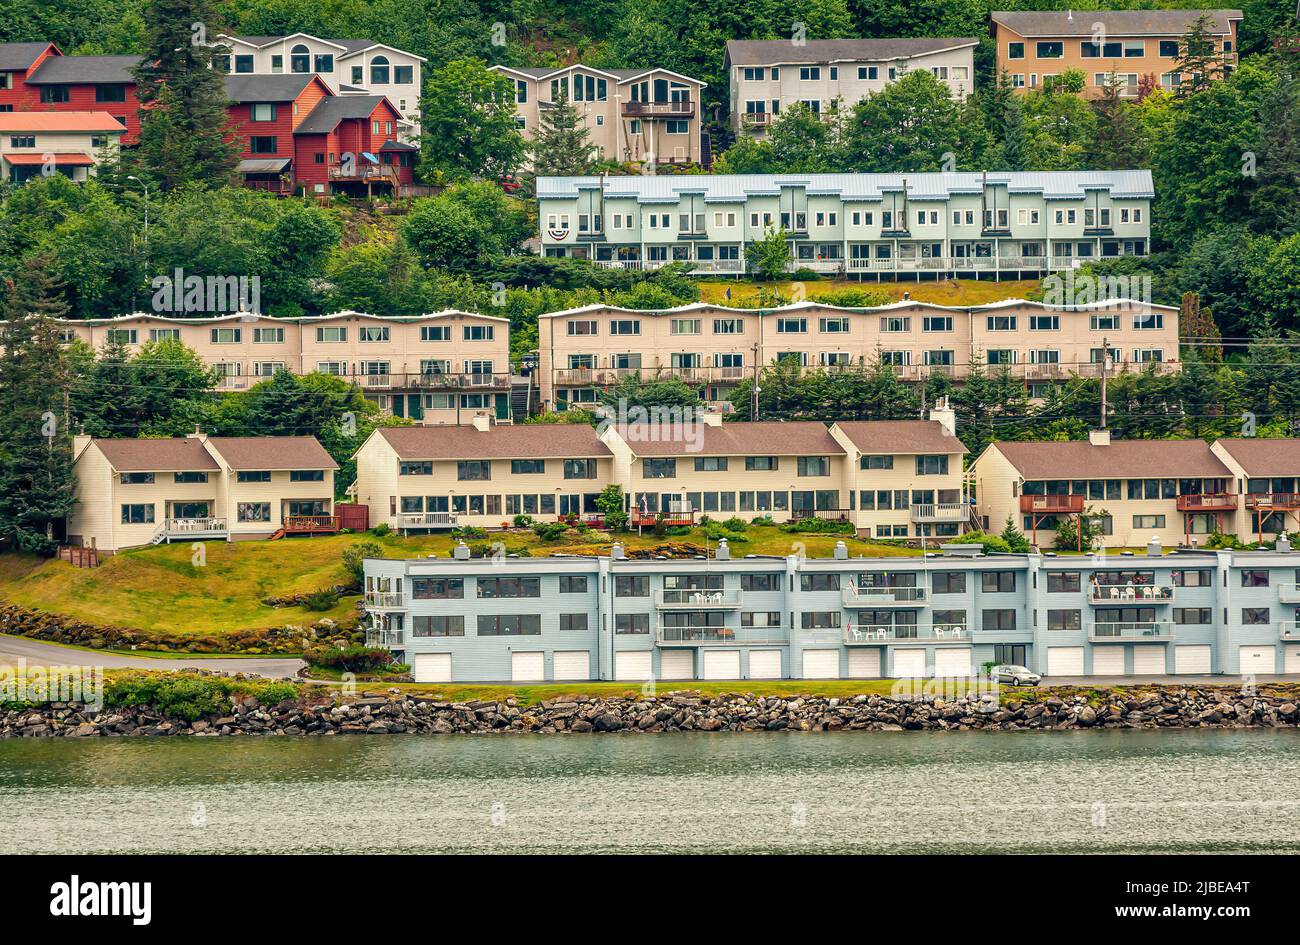 Juneau, Alaska, USA - July 19, 2011: Closeup of similar colored but different style lines of houses in development along Gastineau Channel. Separated Stock Photo